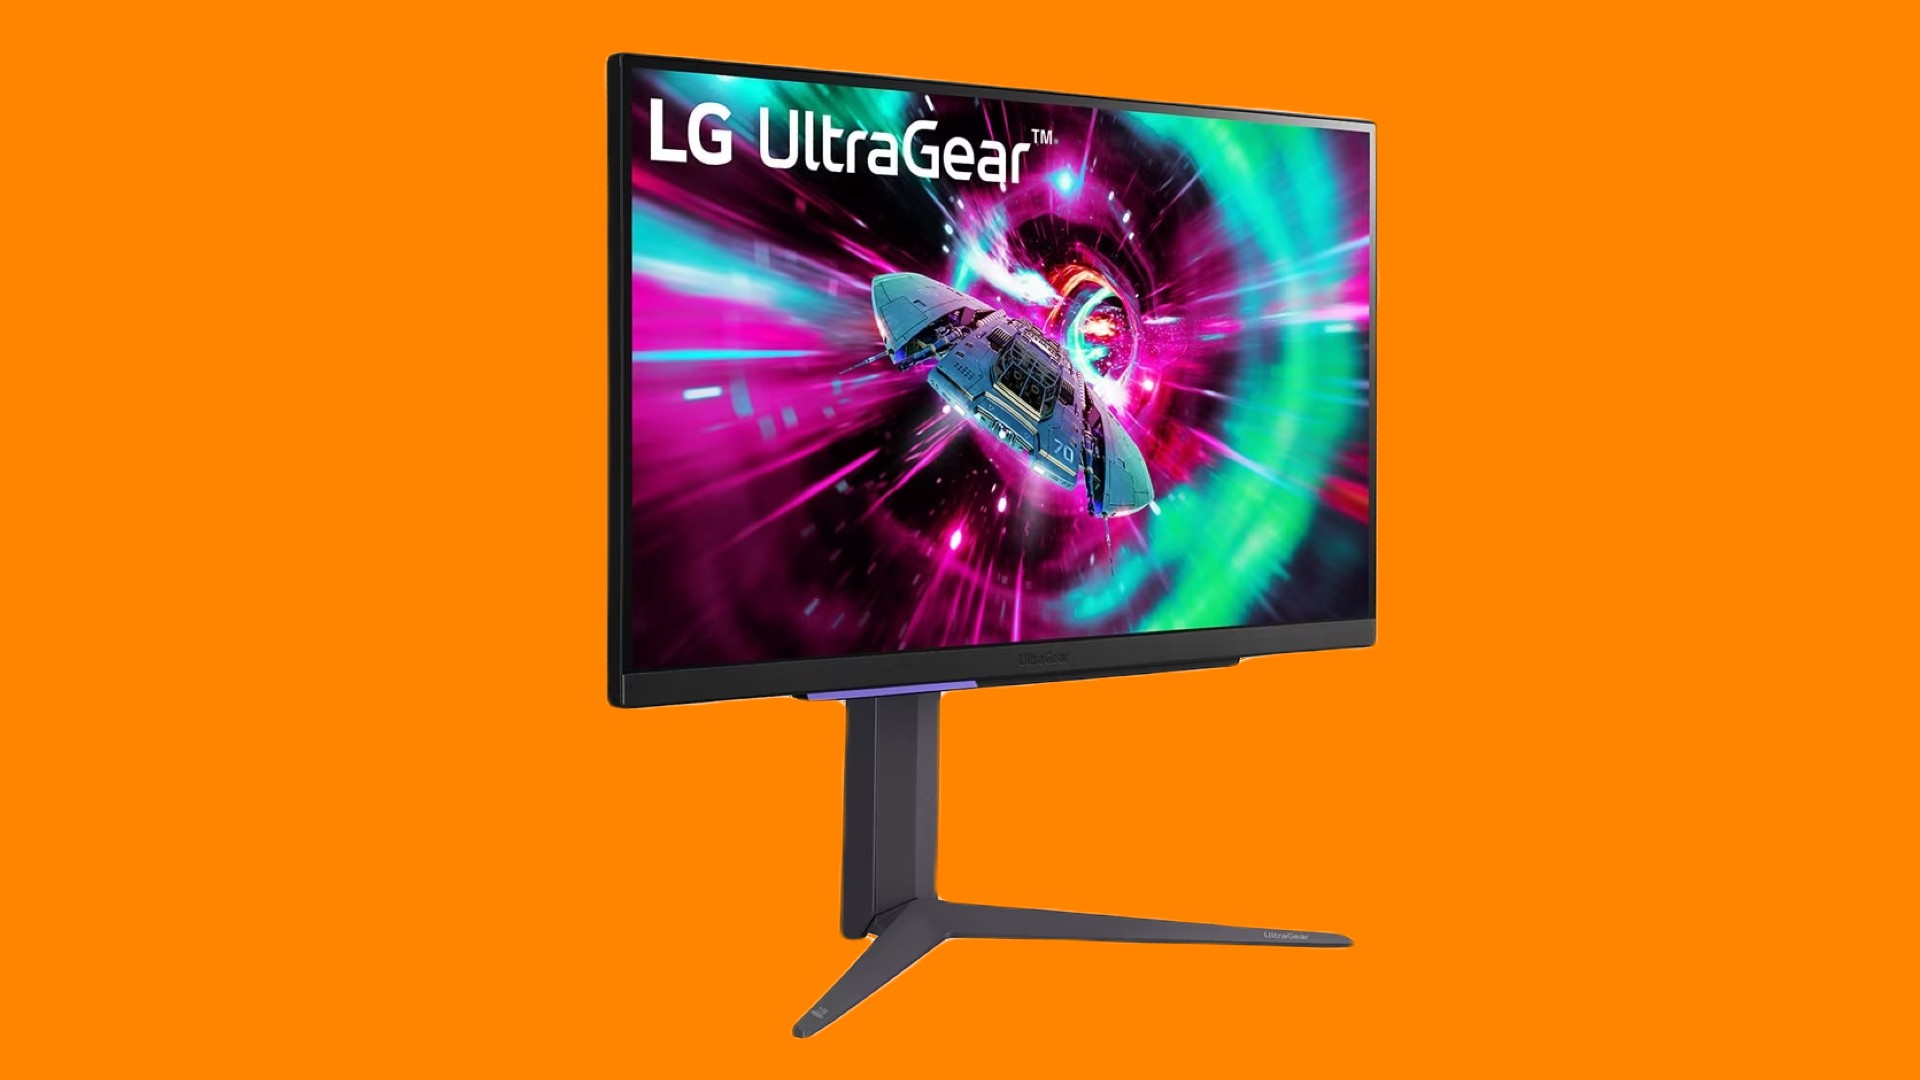 This 4K LG monitor is the cheapest I've ever seen it. Don't hang about